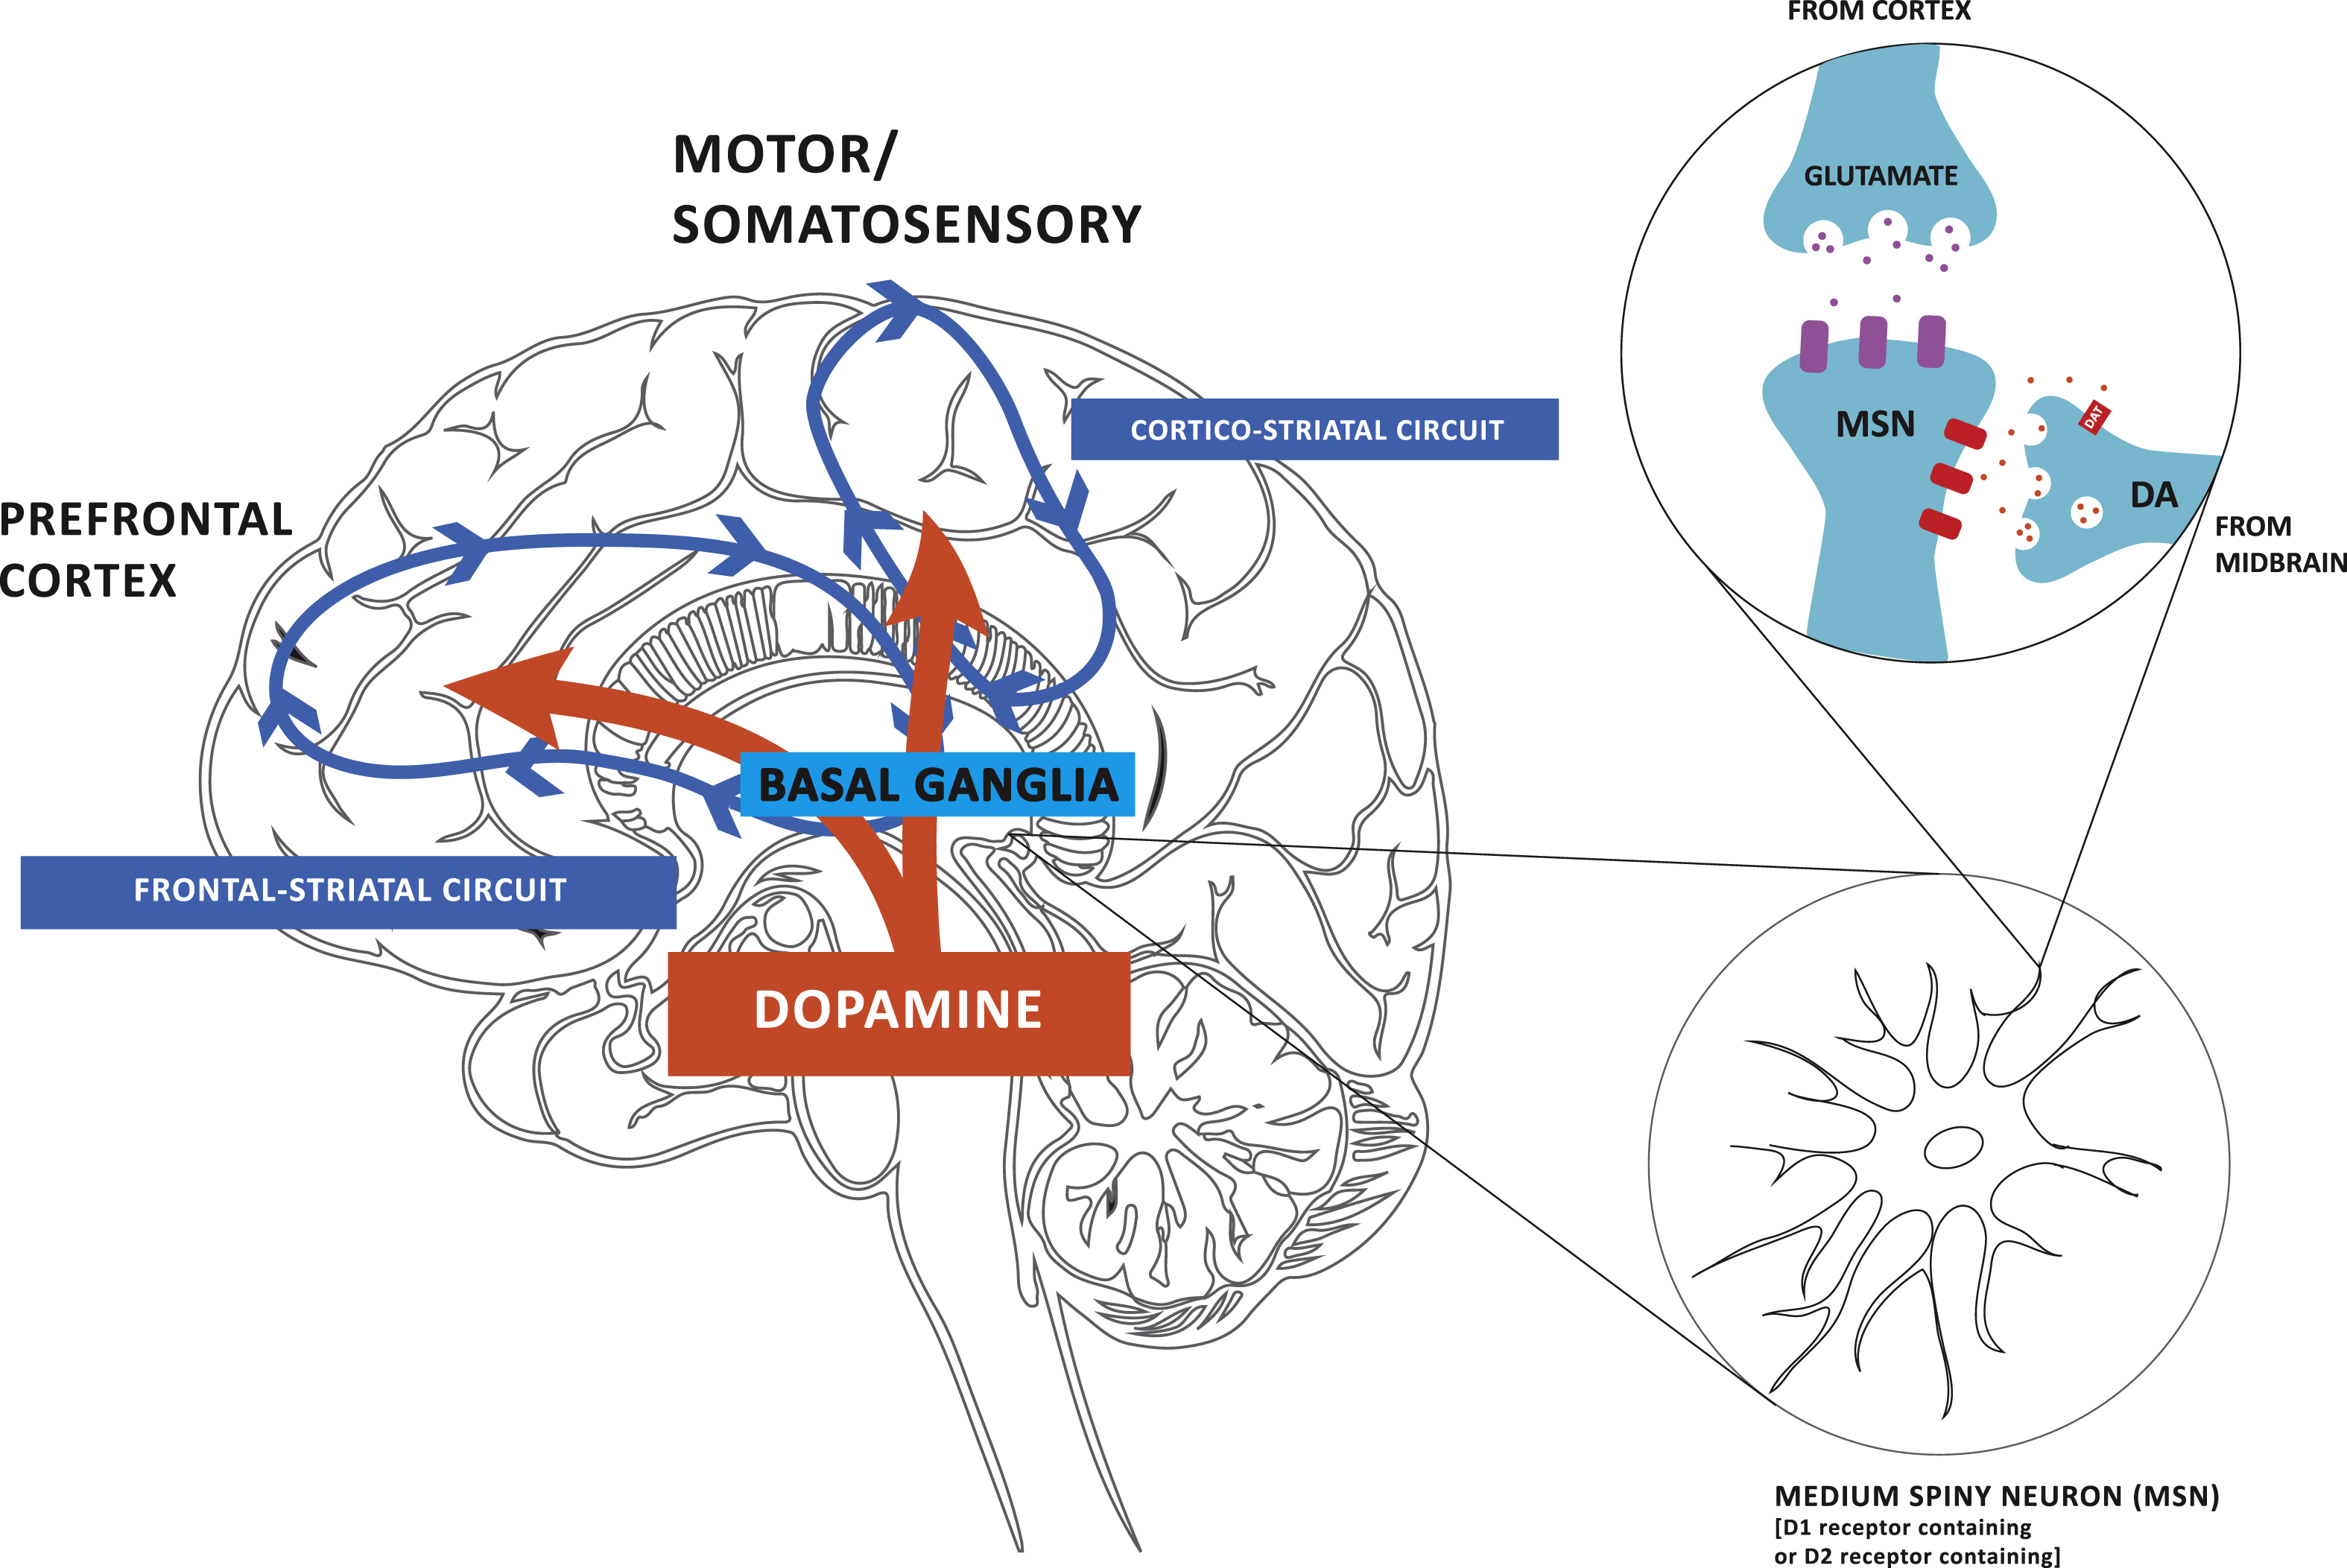 Dopamine (DA) projections play a critical role in modulating both motor and cognitive circuits. Dopamine (DA) from neurons within the substantia nigra pars compacta and ventral tegmental area of the midbrain project to the dorsal lateral striatum of the basal ganglia and the prefrontal cortex, respectively. The earlier and more profound depletion of DA in the dorsal lateral striatum results in impairment in corticostriatal thalamic circuitry, which is important for automatic movements, and consequently greater reliance on frontal striatal circuitry, important for goal-directed motor control in Parkinson’s disease (PD). Although affected to a lesser degree, DA loss in the frontal-striatal circuit contributes to cognitive impairments in PD. Animal studies are beginning to reveal evidence for exercise-induced neuroplasticity in motor and cognitive related circuitry in PD and how the two circuits are inter-related.